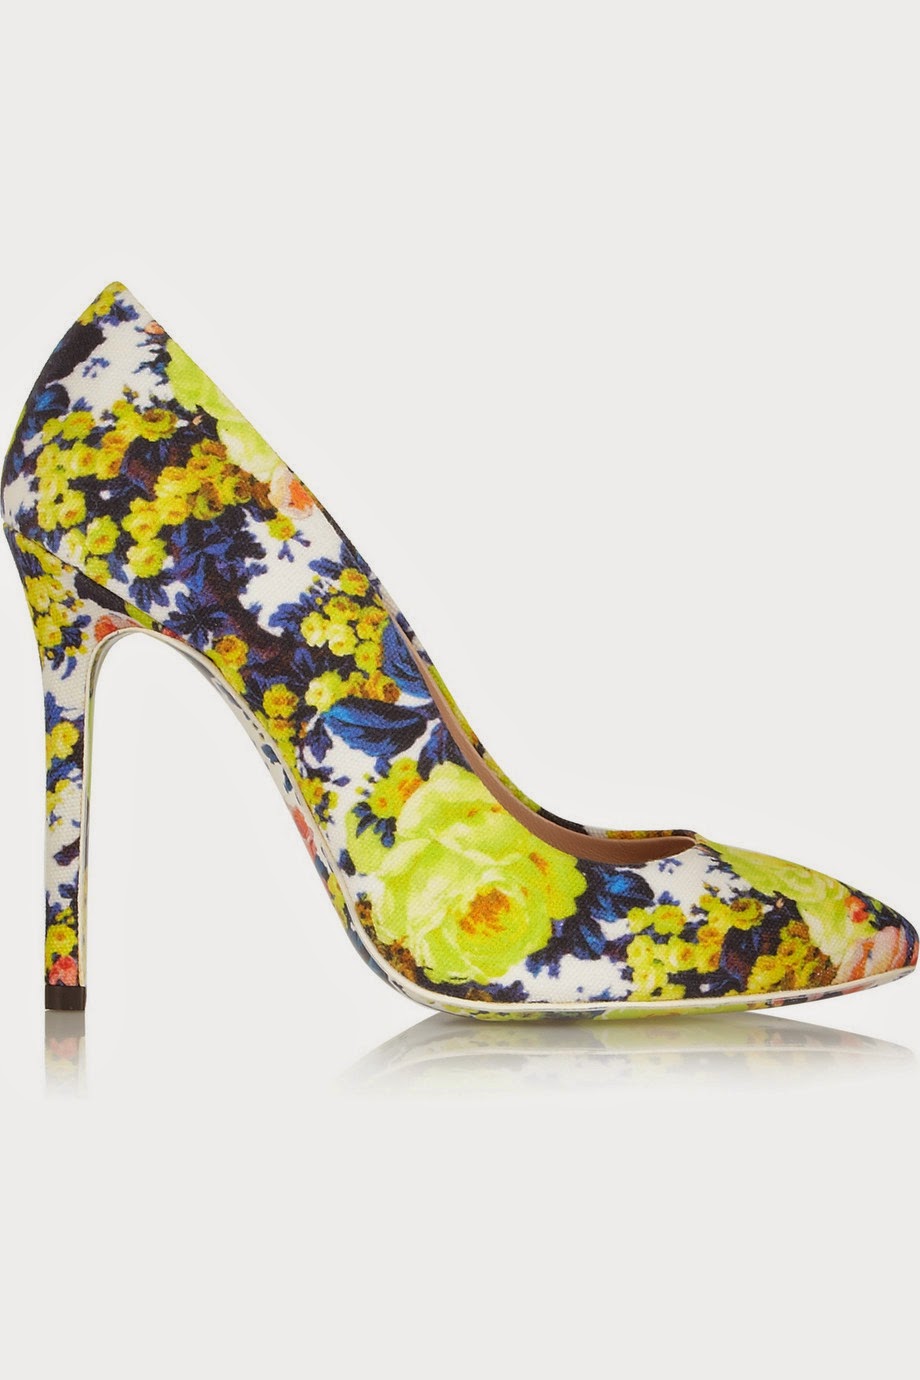 Couture Carrie: Fantastic Florals!